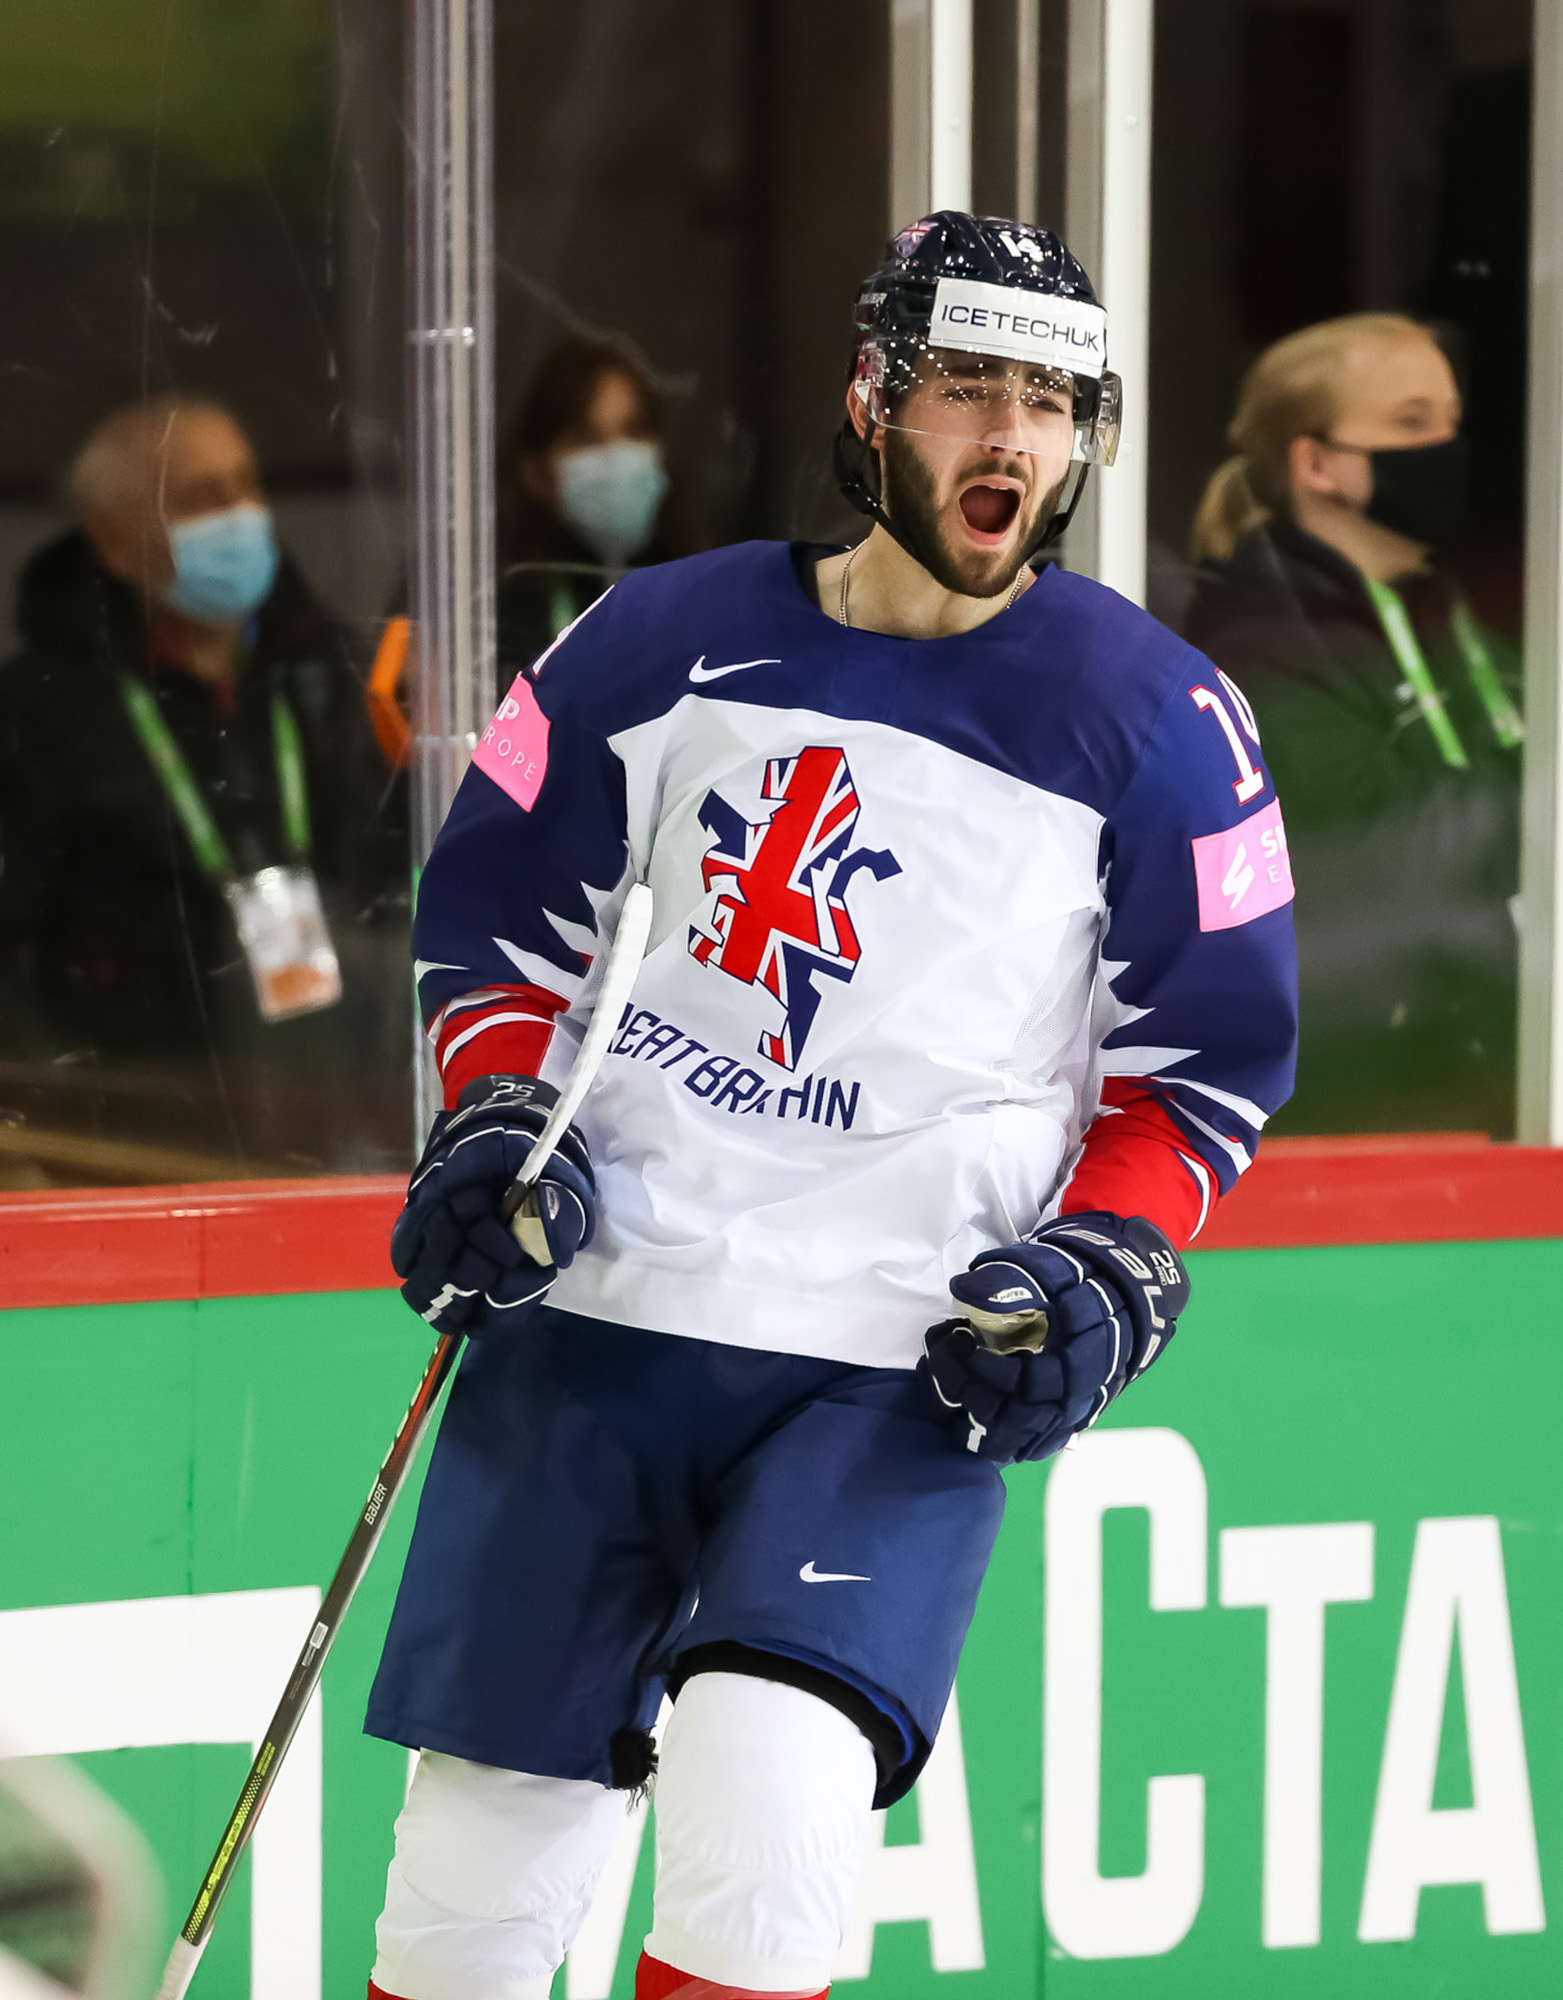 Team GB Ice Hockey on Twitter: Defenceman Paul Swindlehurst has been named  in the Great Britain team for the @IIHFHockey @IIHFWorlds2021 next month.  The 27-year-old, who has recovered from injury, completes GB's